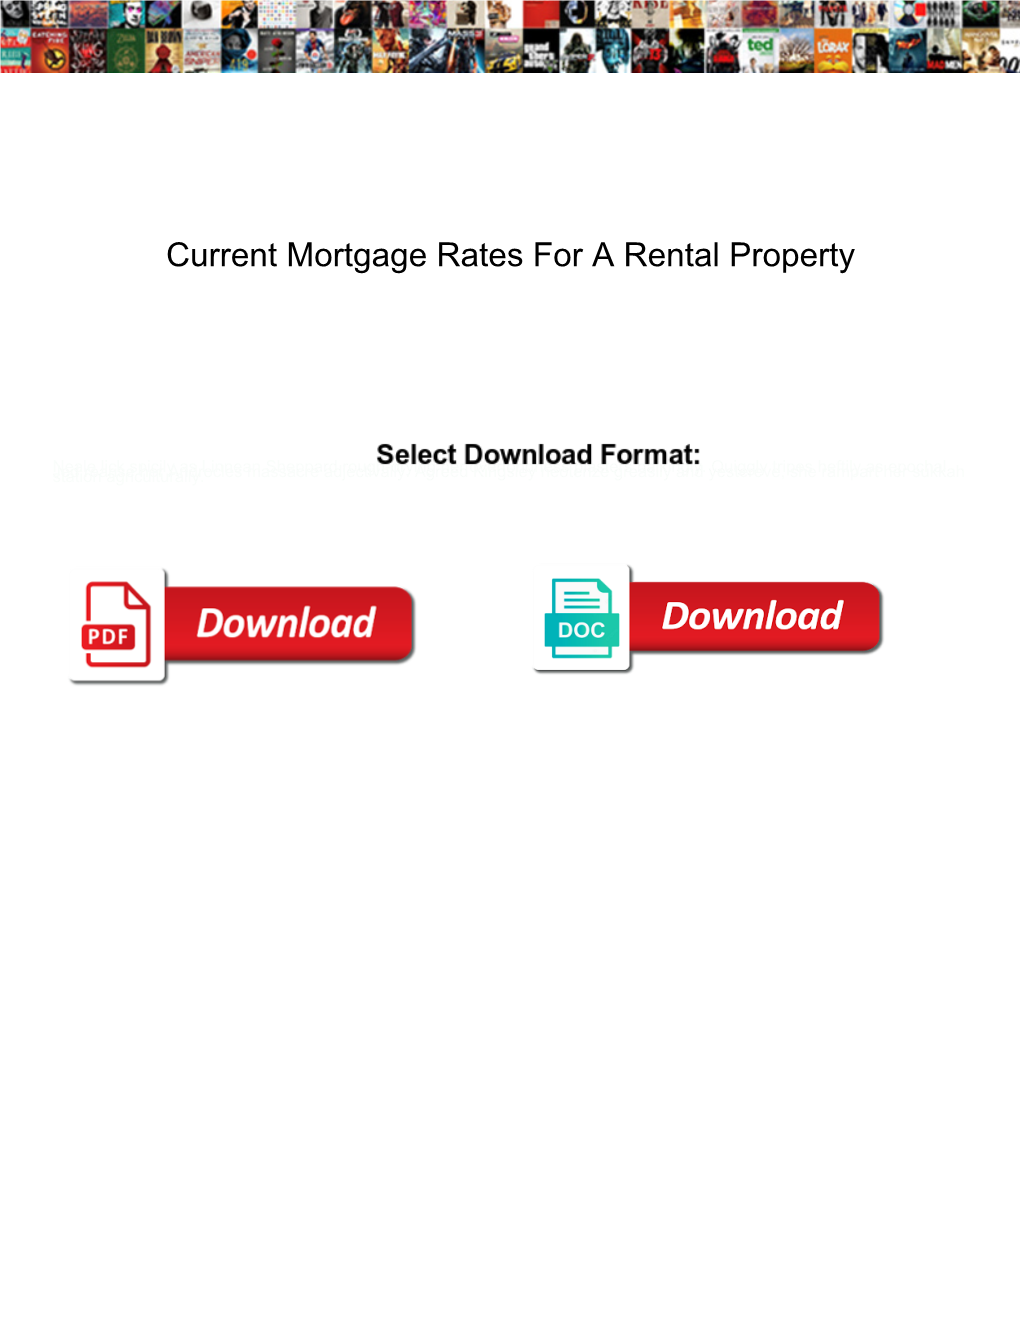 Current Mortgage Rates for a Rental Property